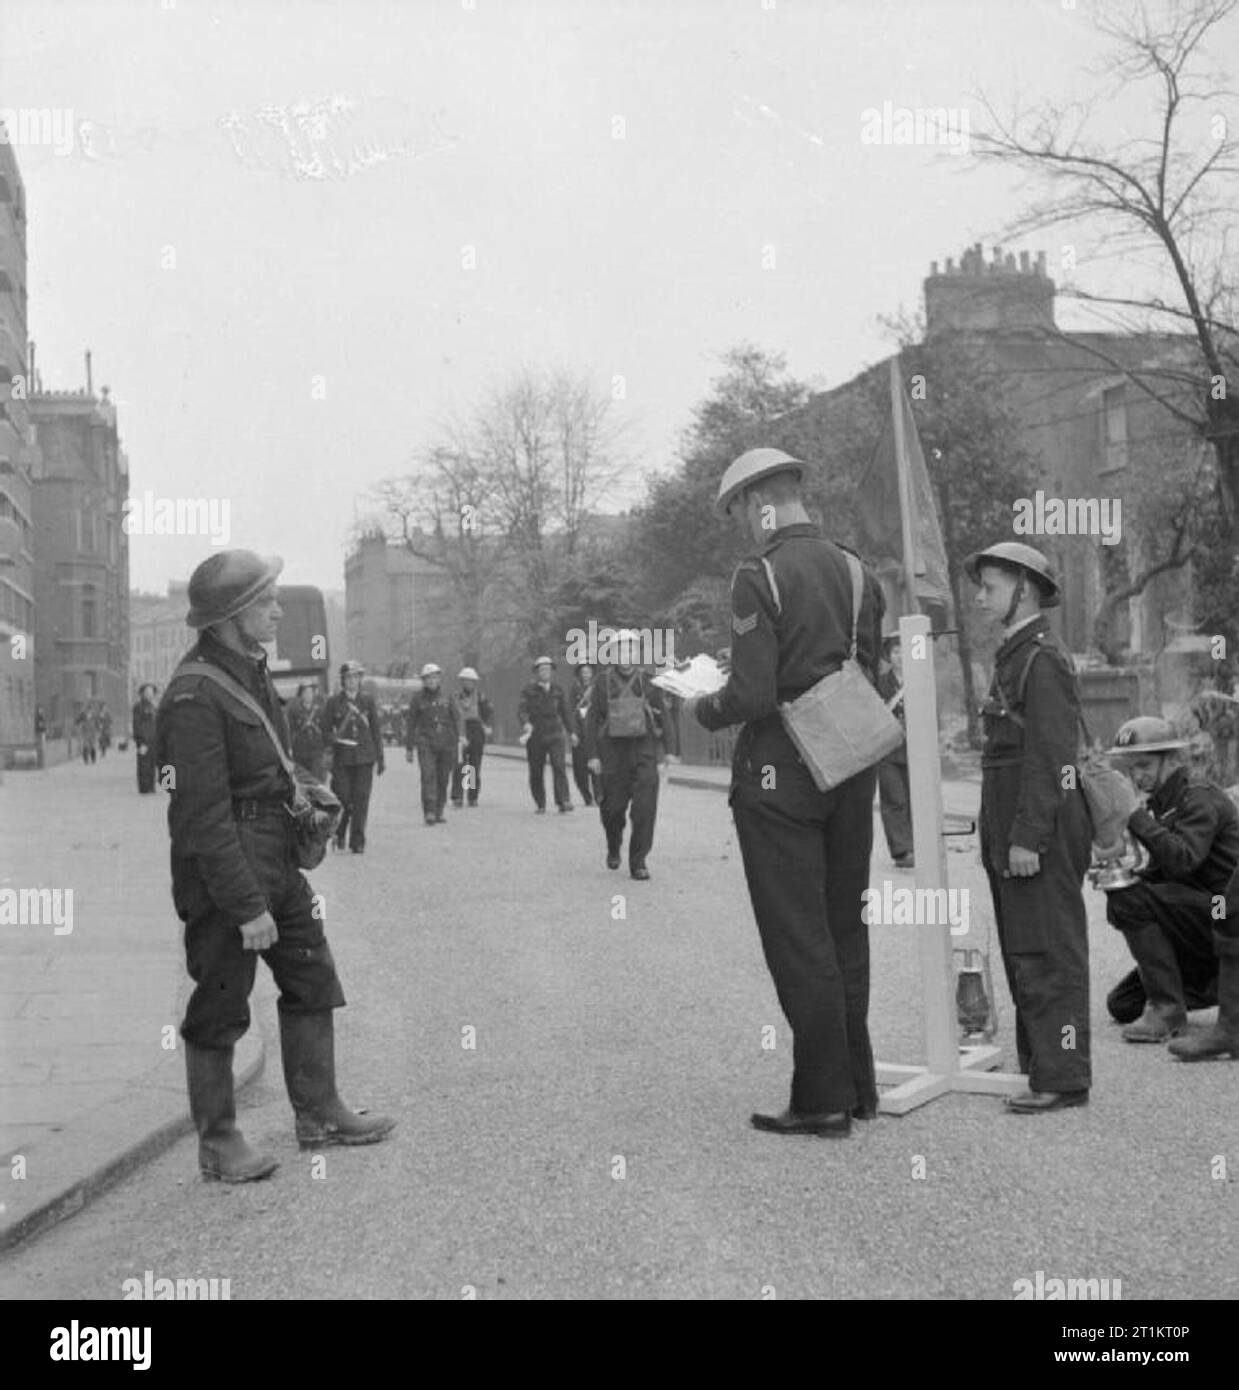 The Reconstruction of 'an Incident'- Civil Defence Training in Fulham, London, 1942 Leaders of the various services arrive and report to the incident officer. On the left can be seen the ARP Warden who originally reported the incident. The incident officer wears a blue helmet, has a blue lamp and a blue flag, to himself and the incident control point clearly visible to all Civil Defence workers involved. A boy messenger can also be seen. This photograph was taken on North End Road, at the junction with Conan Street (now West Cromwell Road), looking South towards Fulham. Just visible on the lef Stock Photo